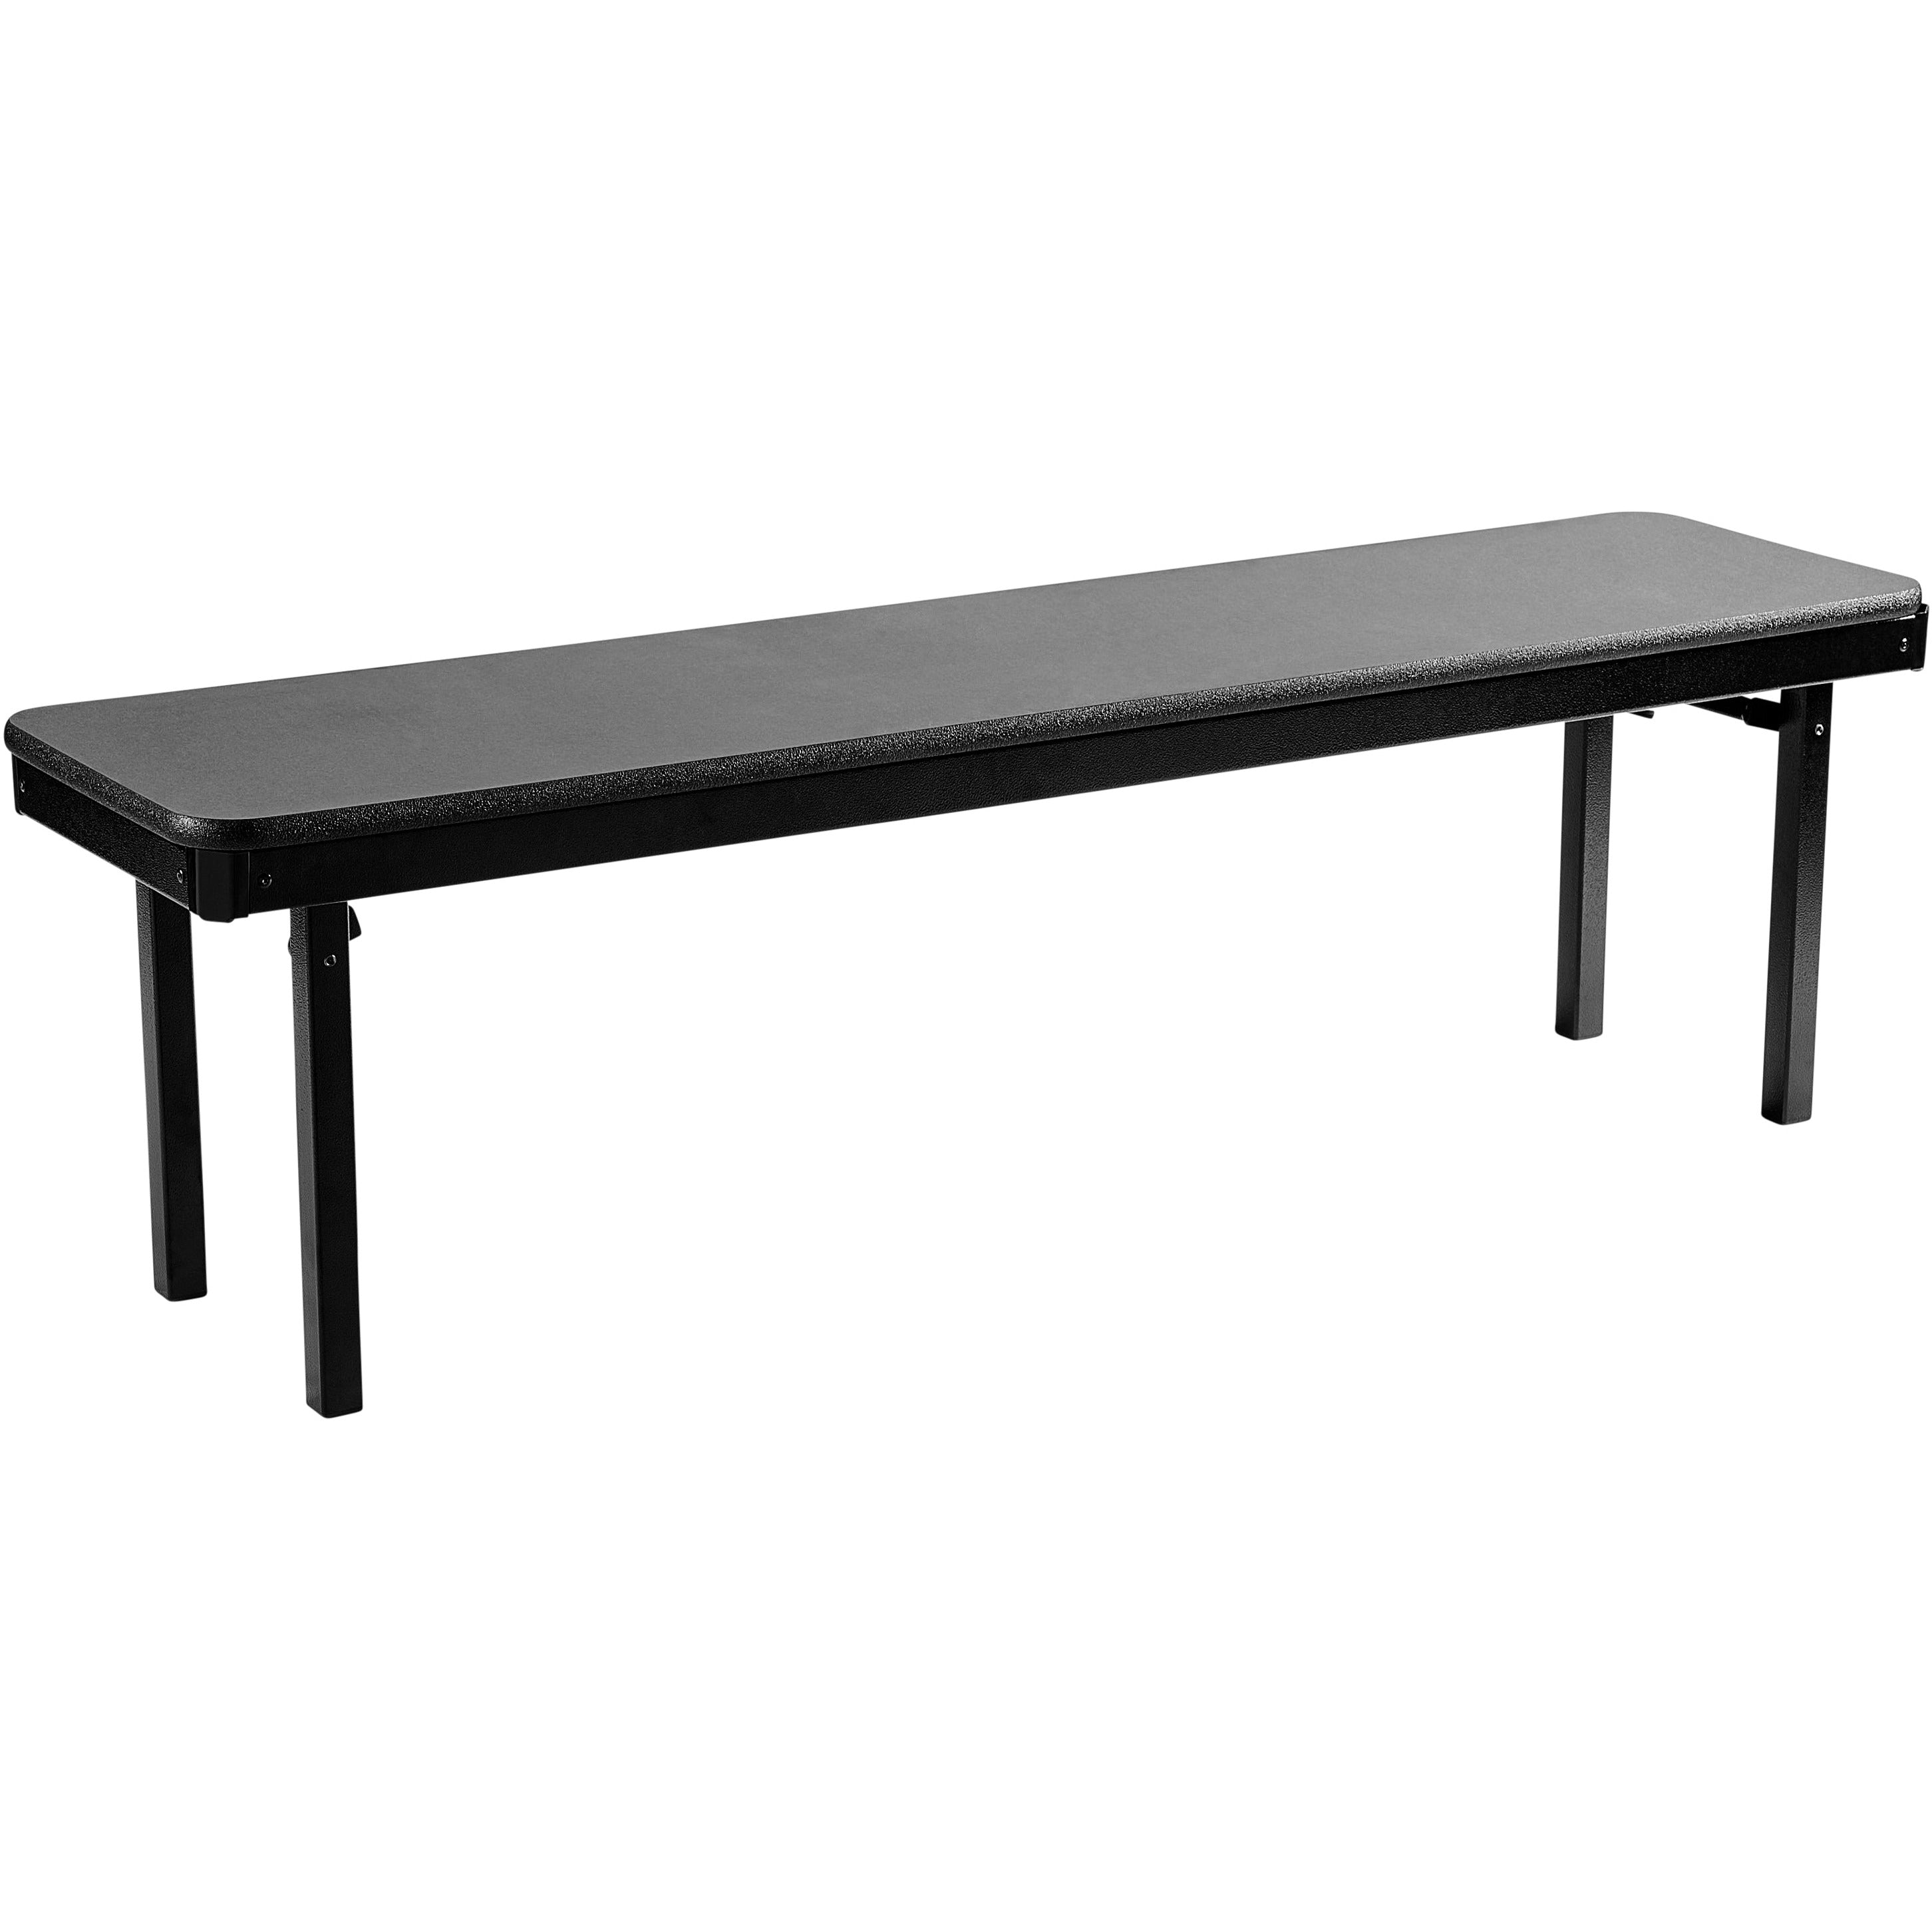 Folding Bench - MSFB Series - 15" x 96" - MDF with ProtectEdge